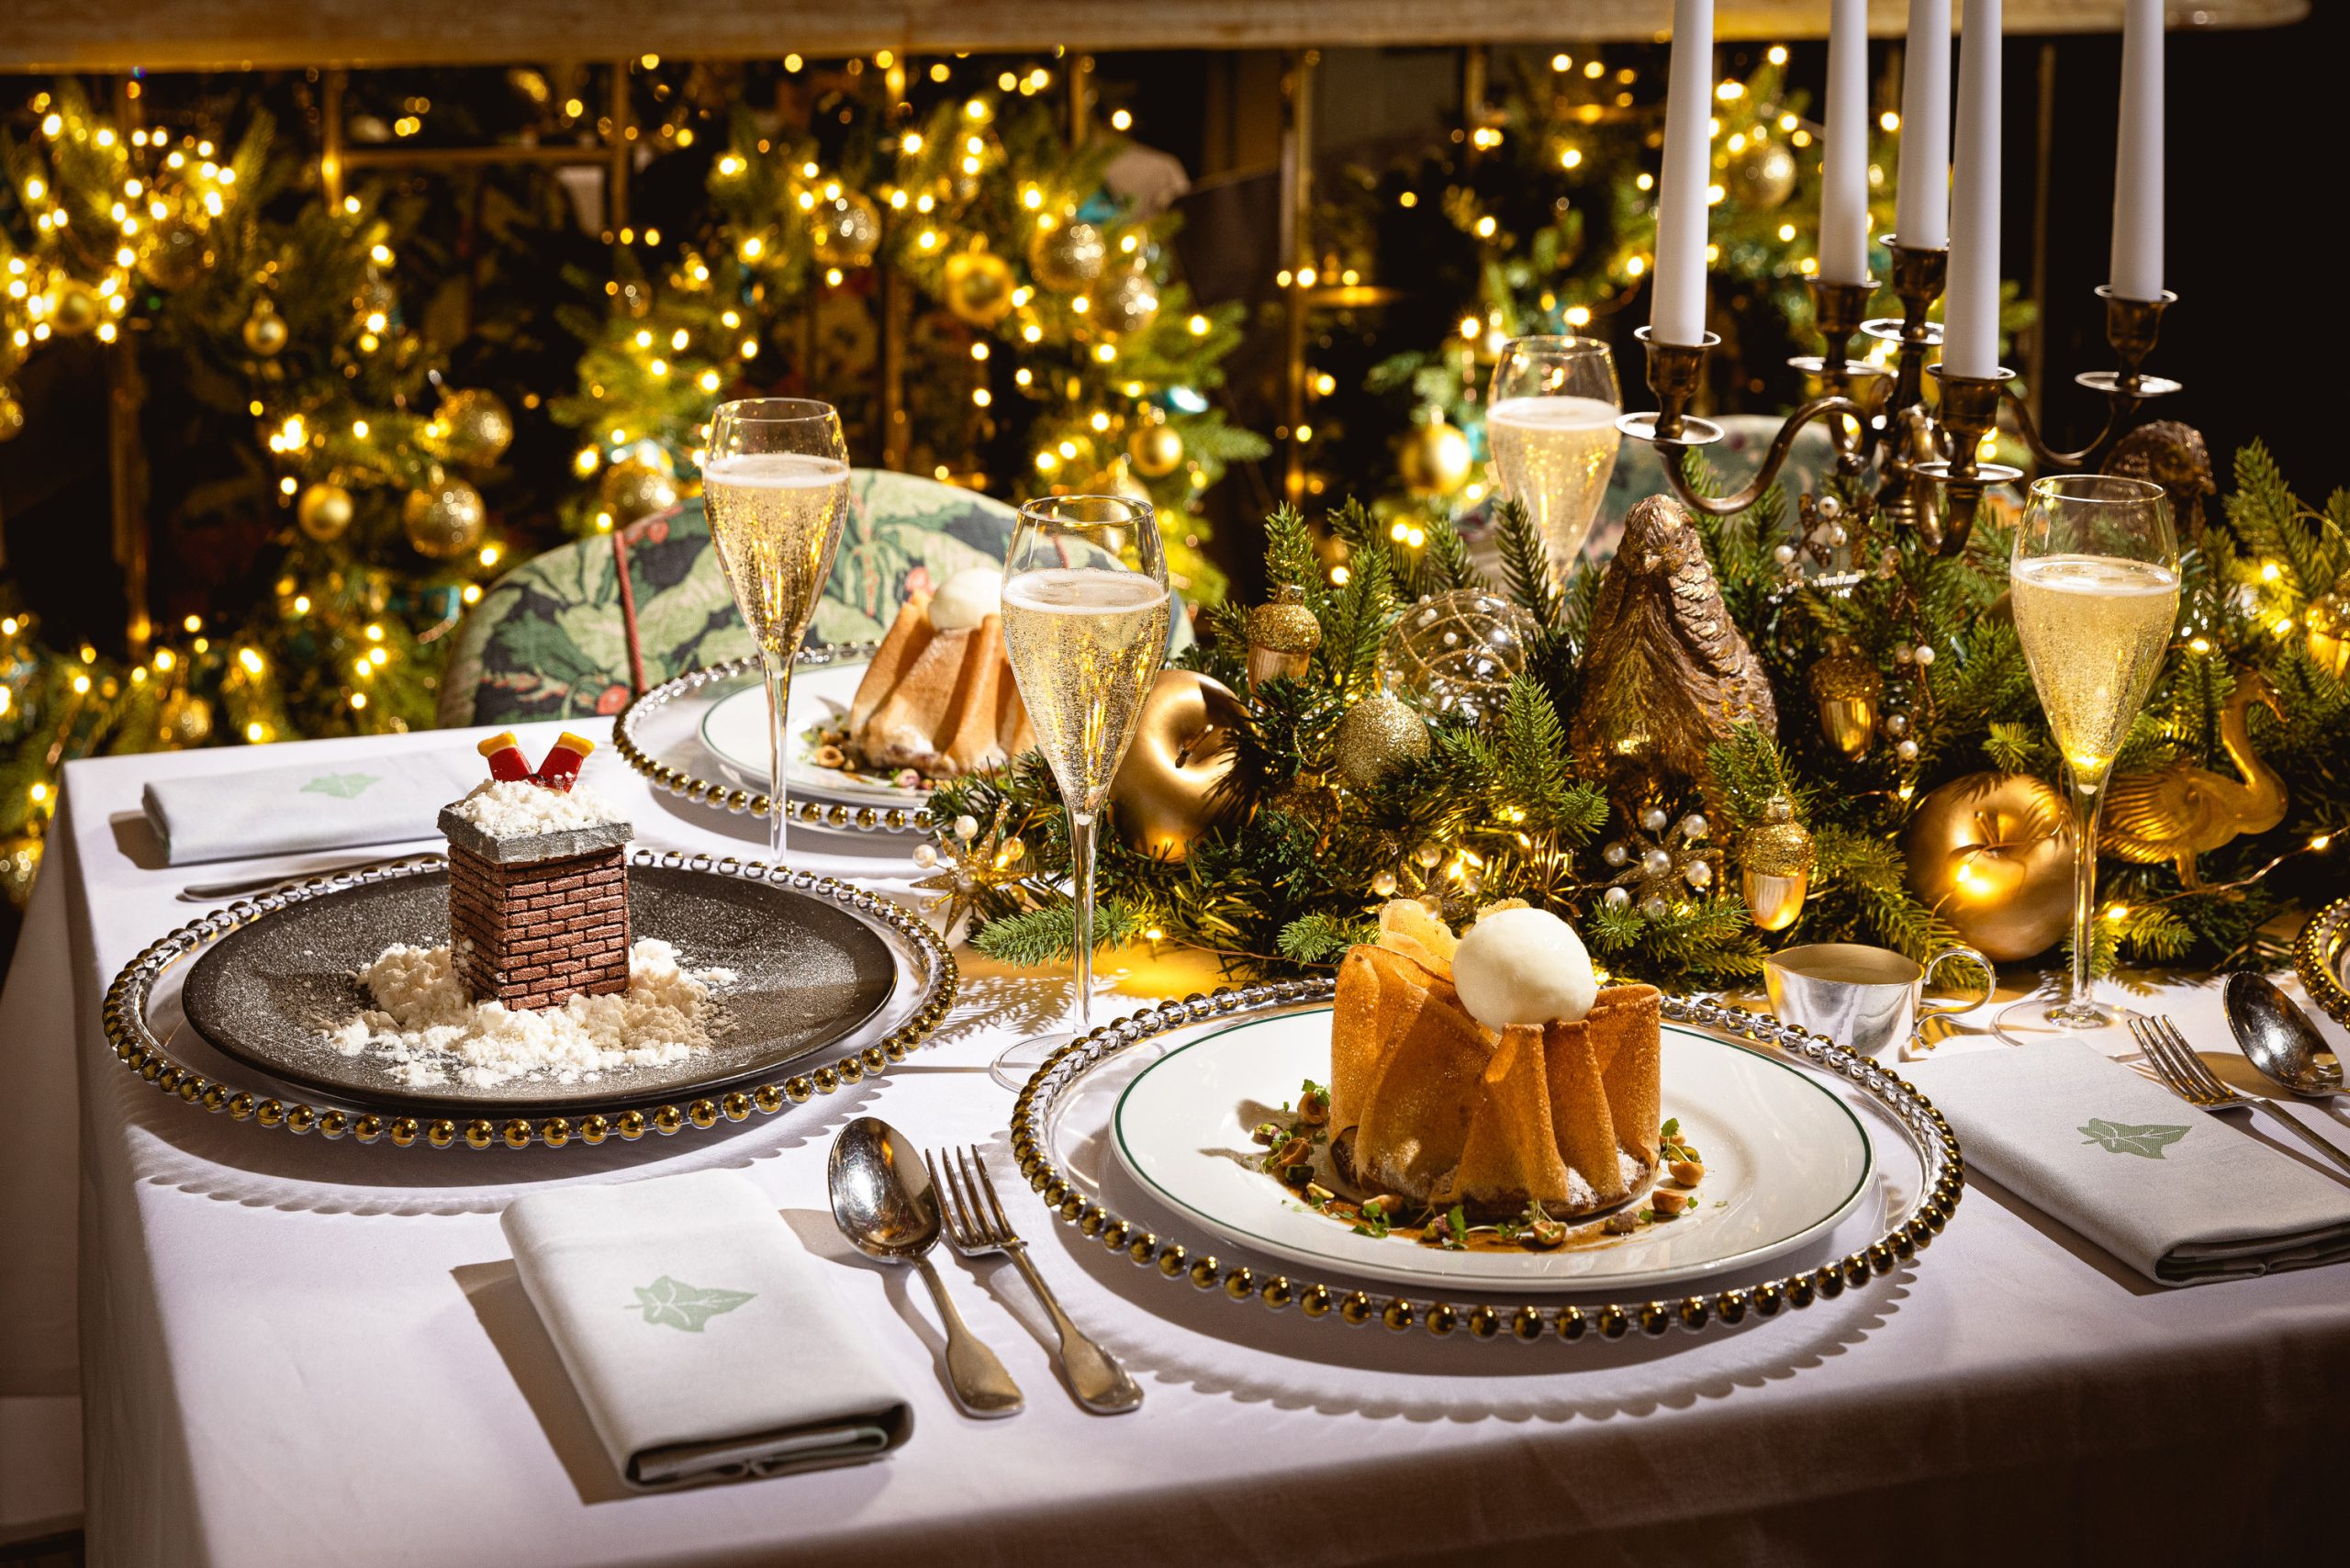 Festive Feasting at The Ivy